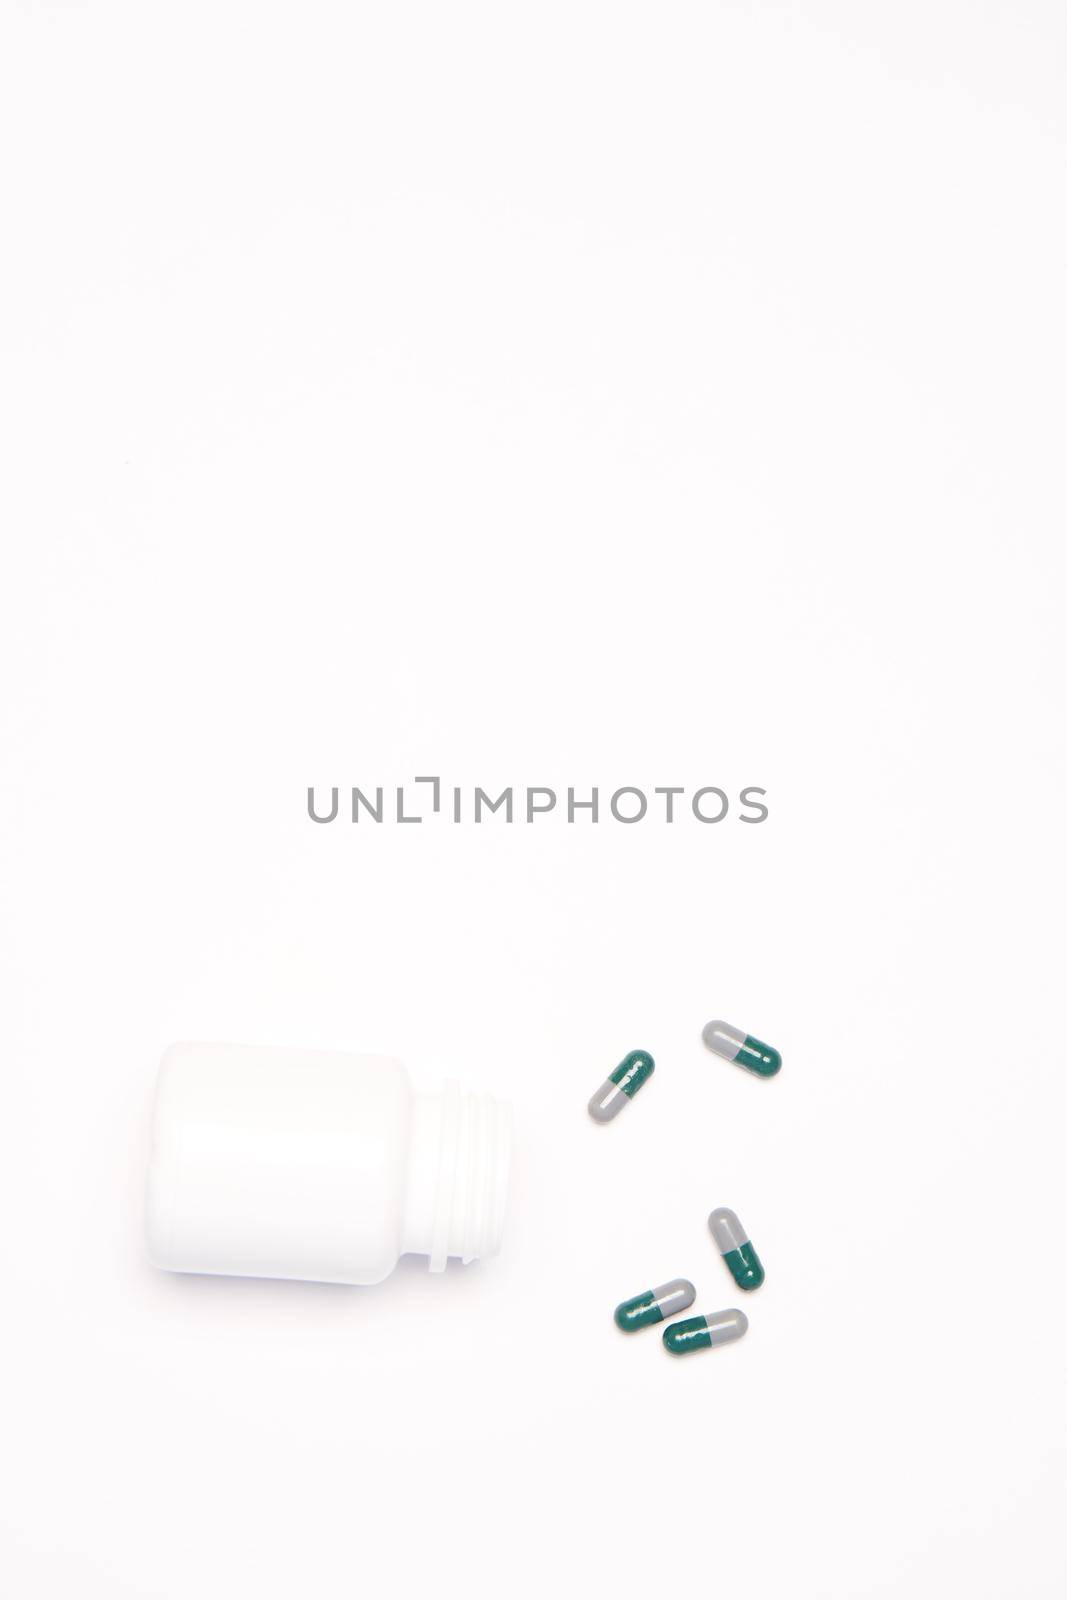 A jar with multi-colored pills arranged in a certain order on a Light background Copy Space top view by SHOTPRIME